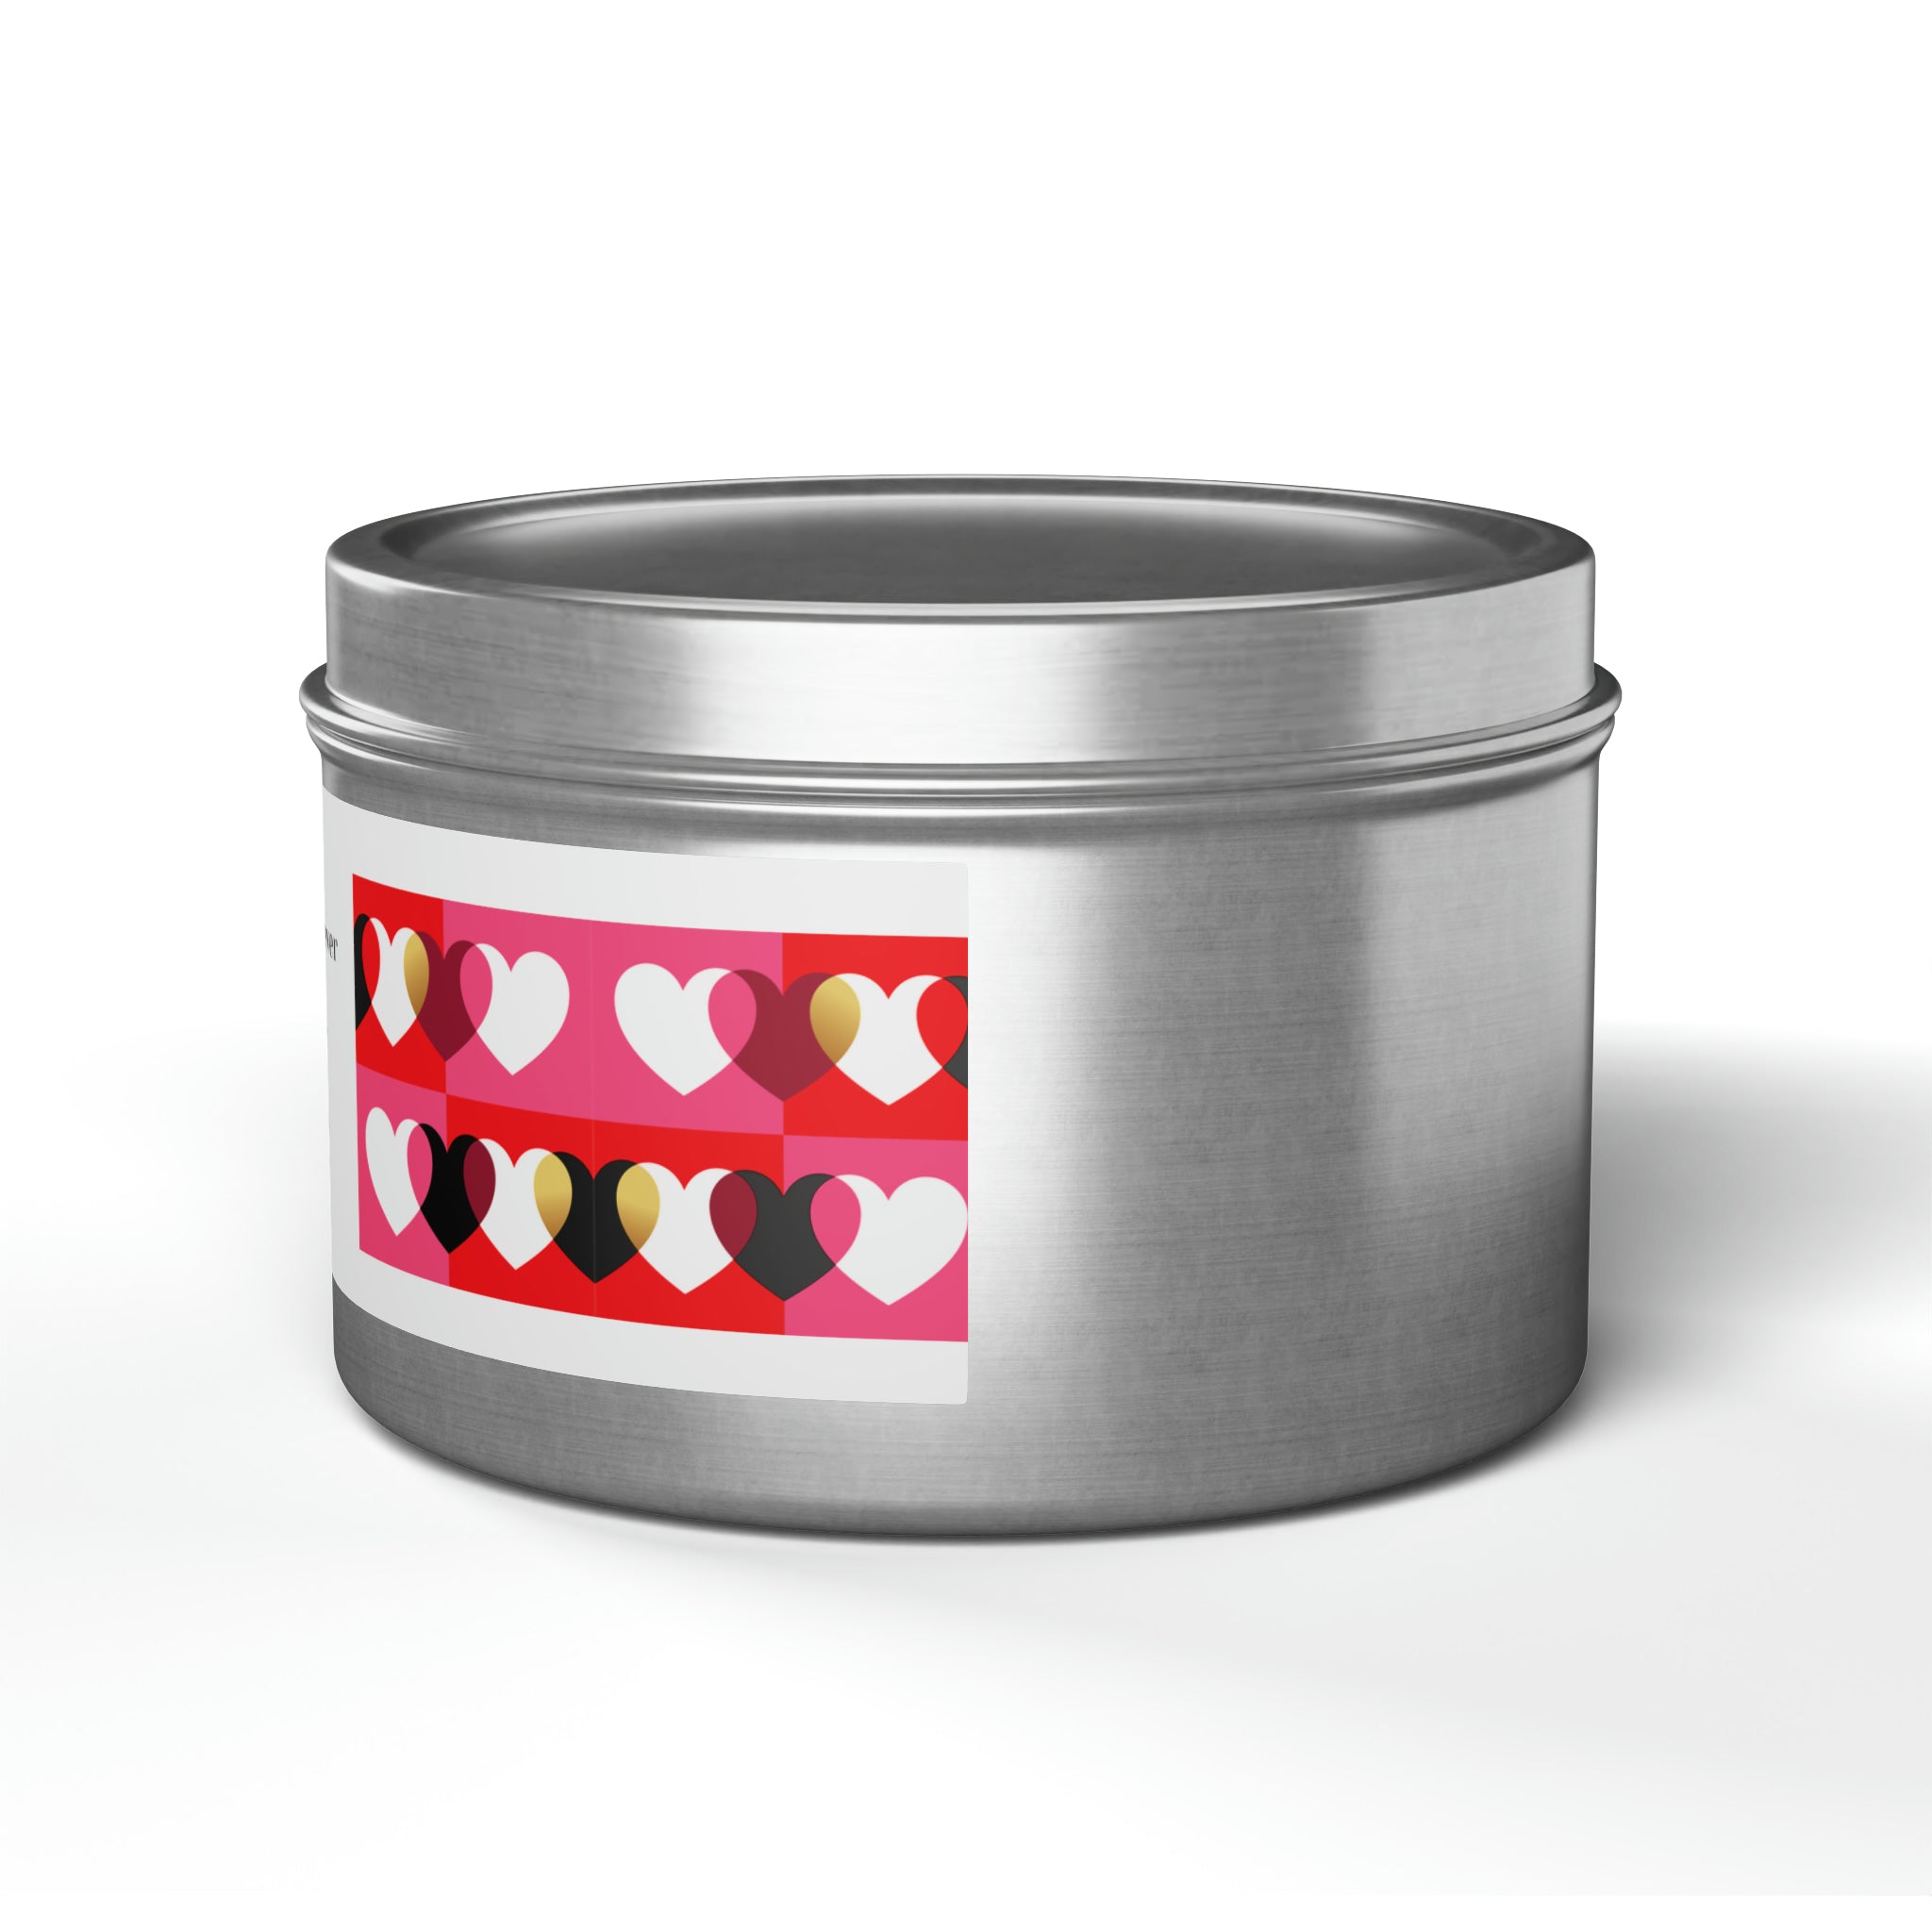 Vanilla Bean Always & Forever Soy base candle love, valentine's day gift Tin Candles-64